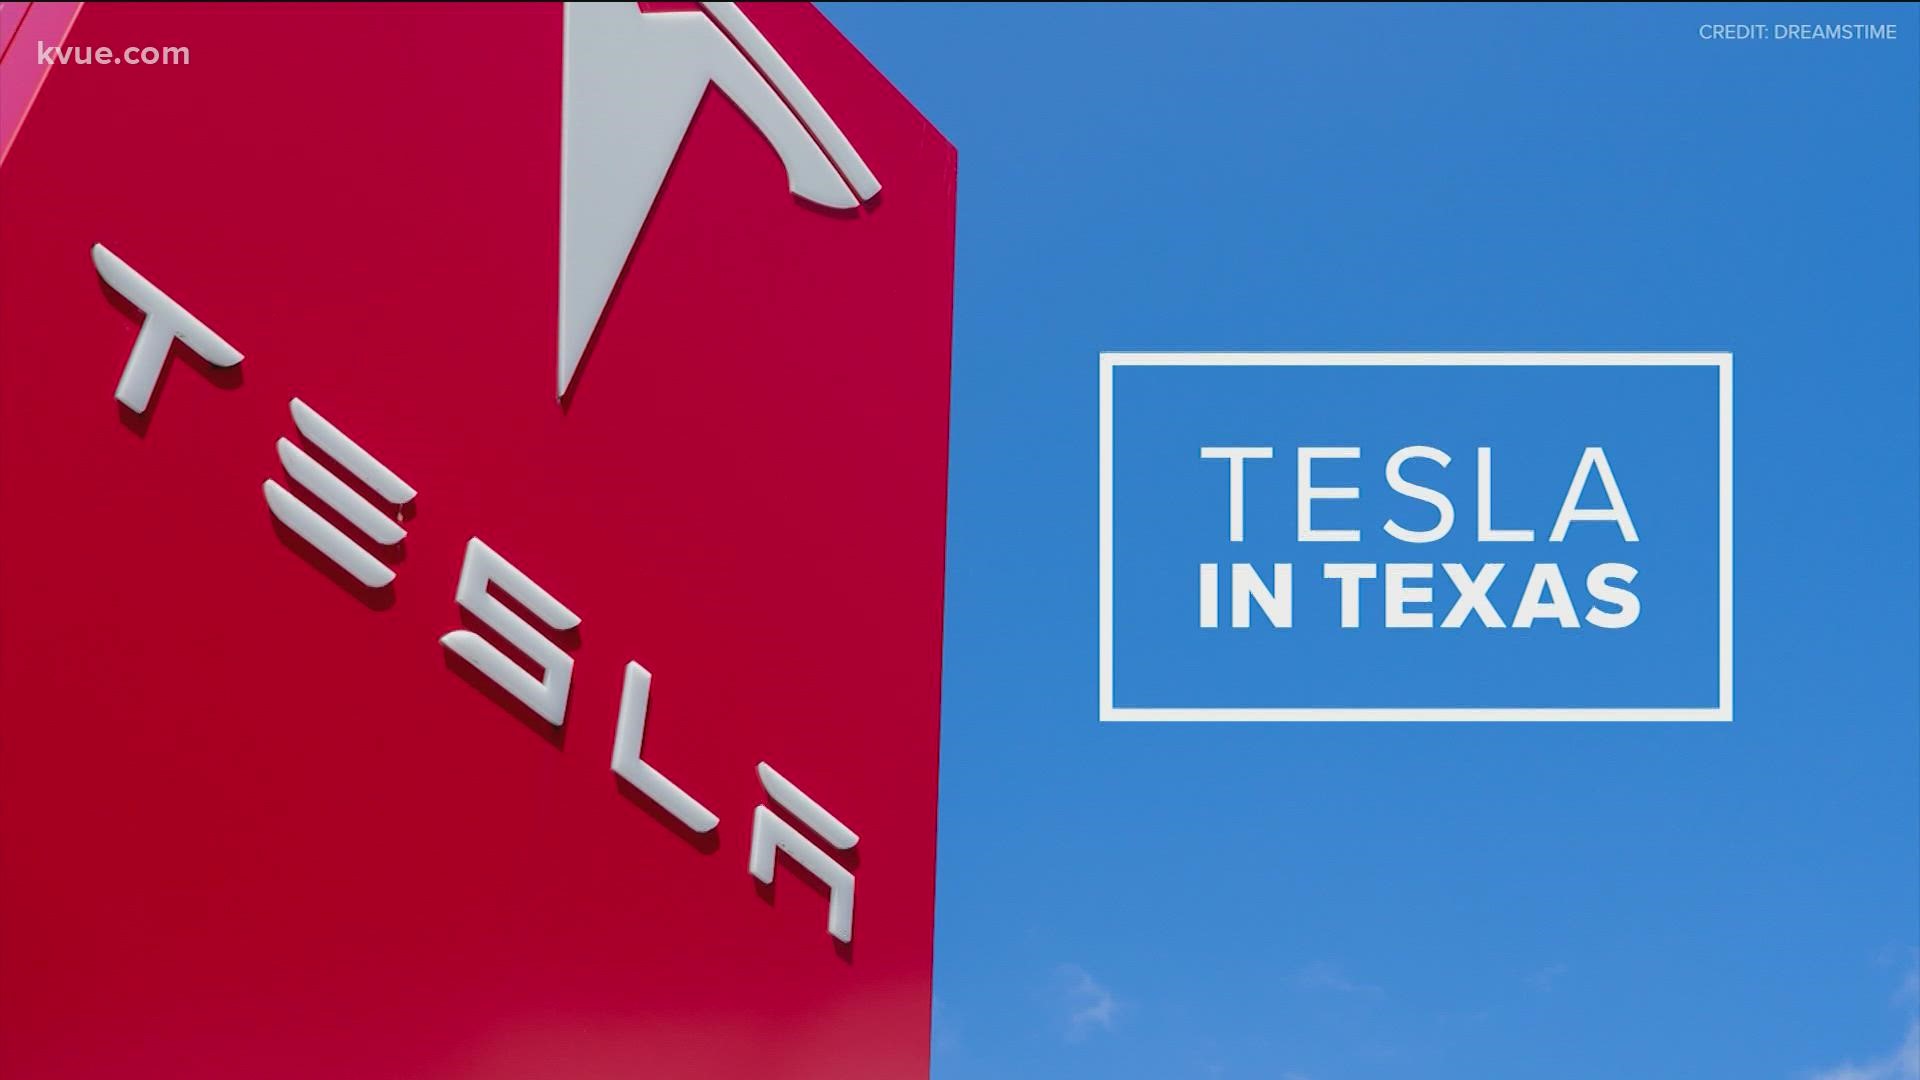 Austin is set to become an even bigger tech hub when Tesla moves its headquarters here. That's leaving many to wonder how that will impact the housing market.